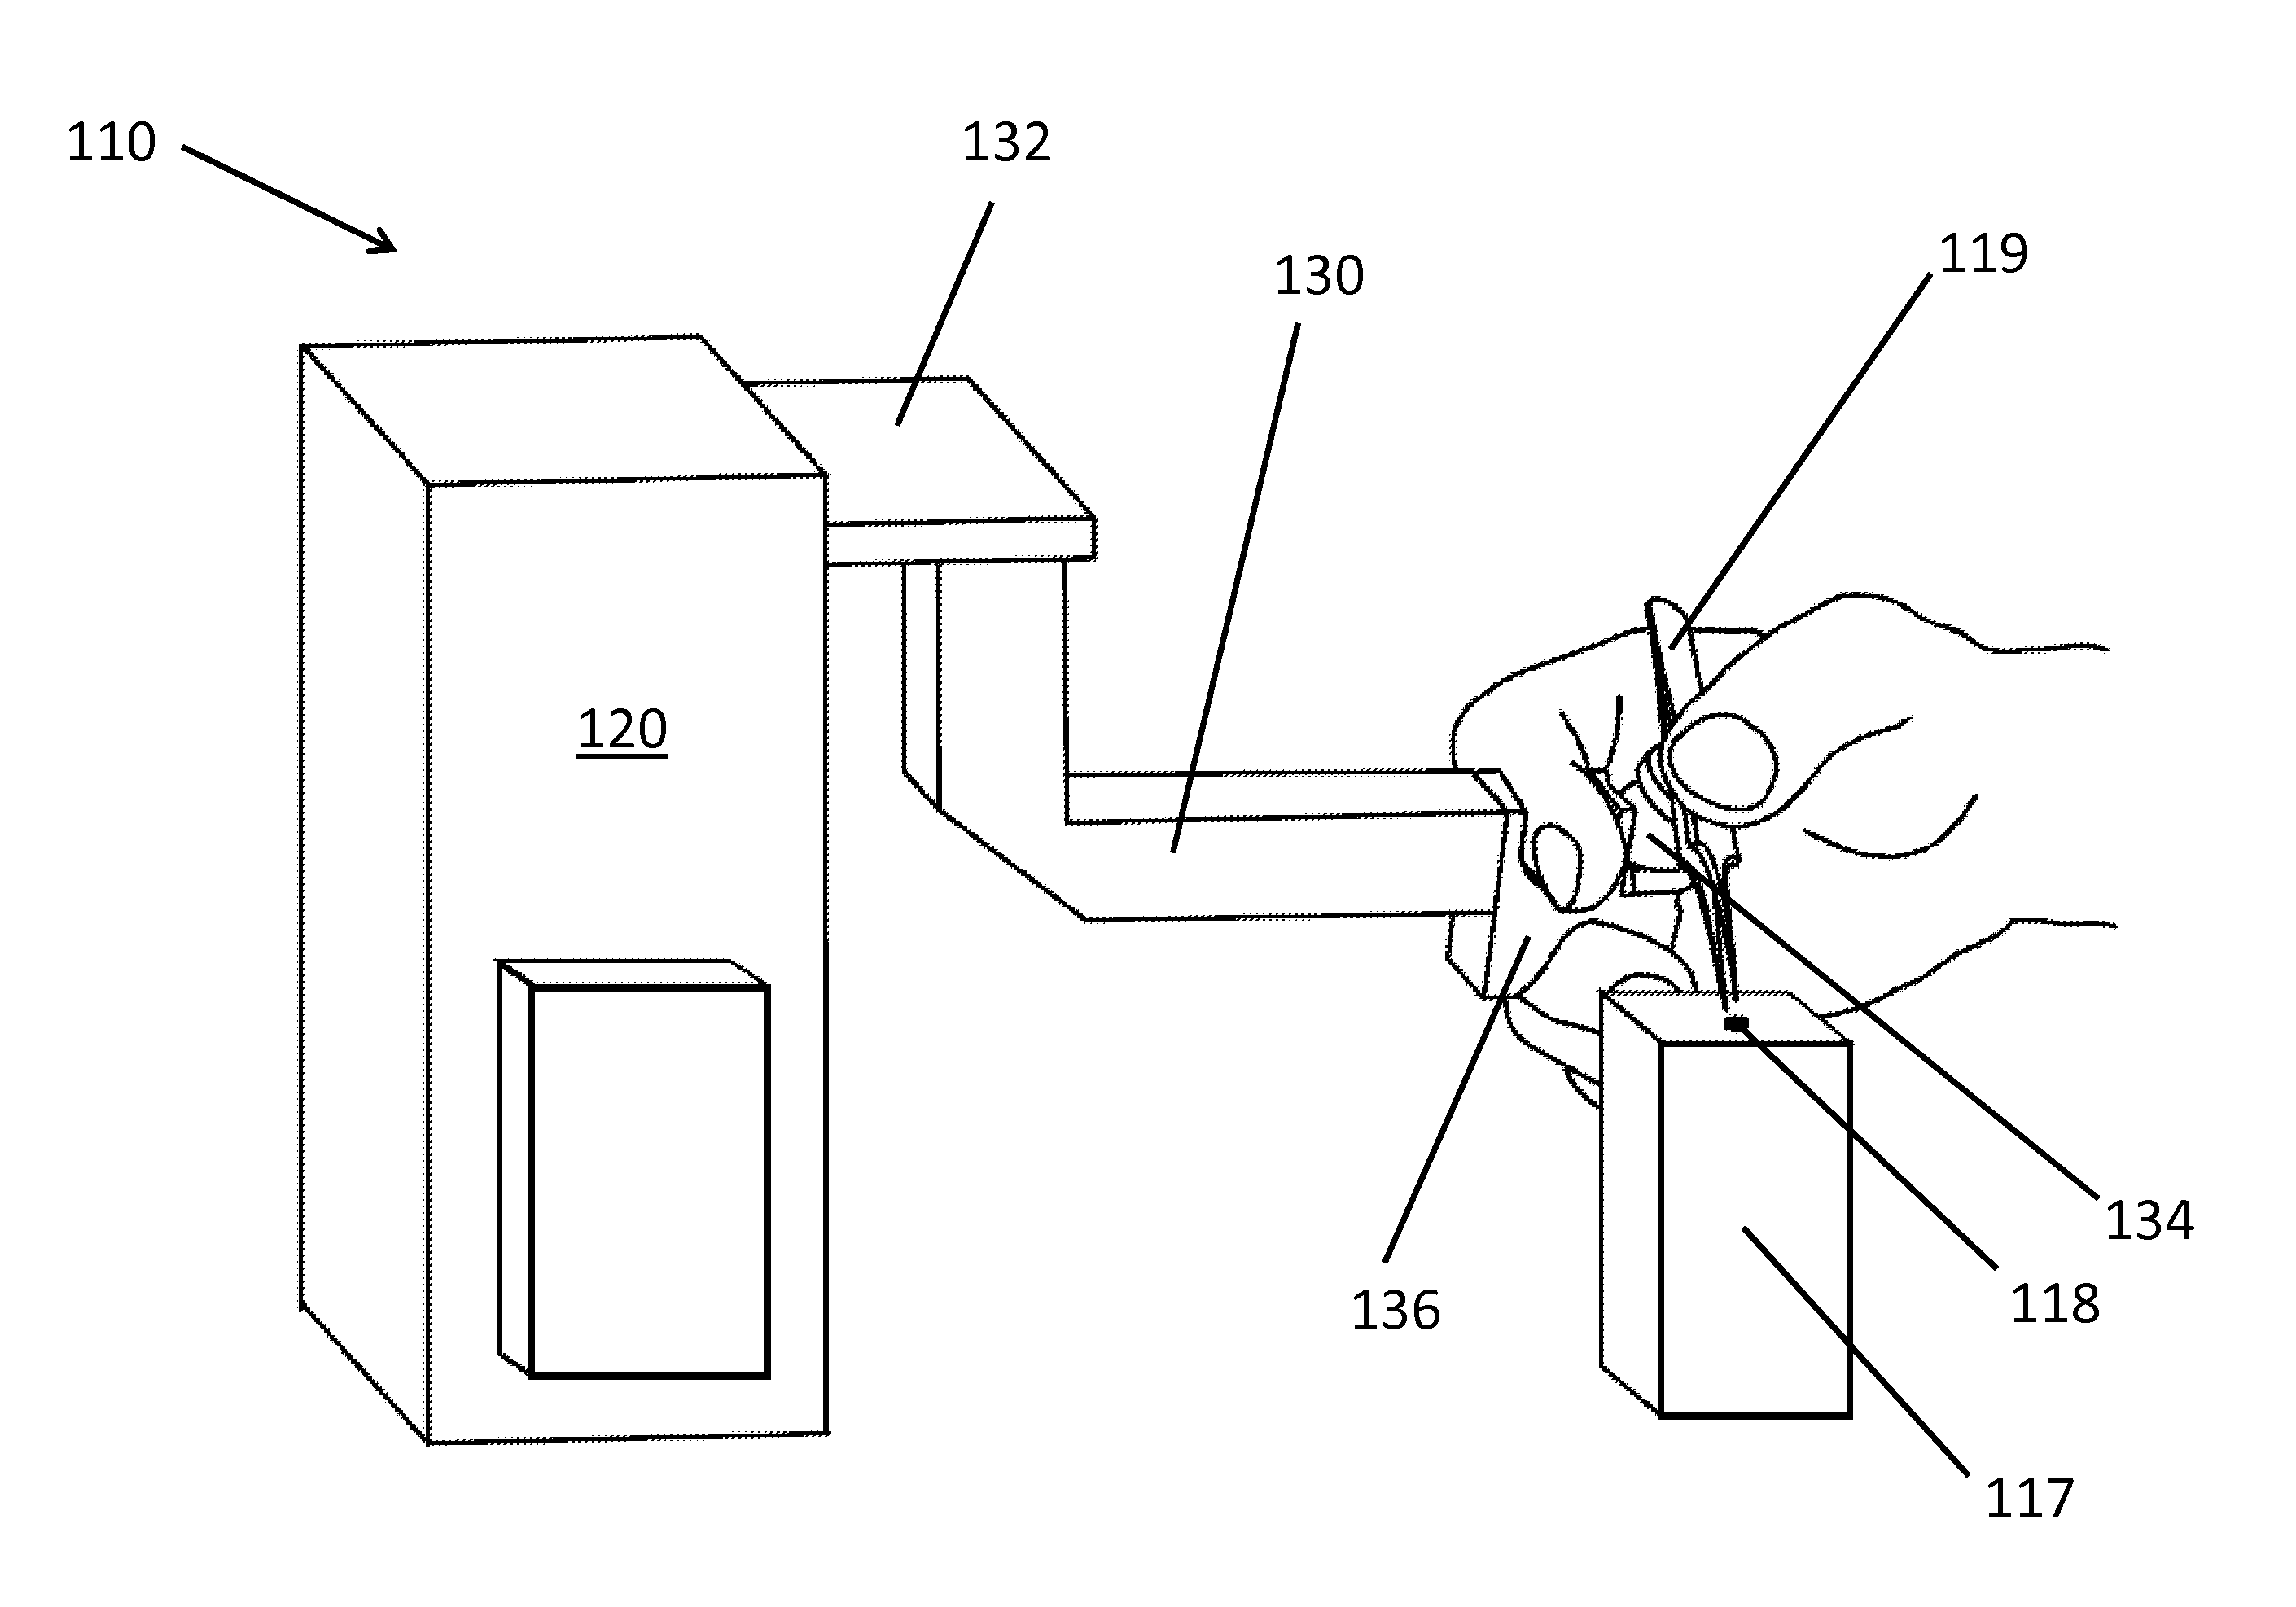 Device and Method for Controlled Motion of a Tool